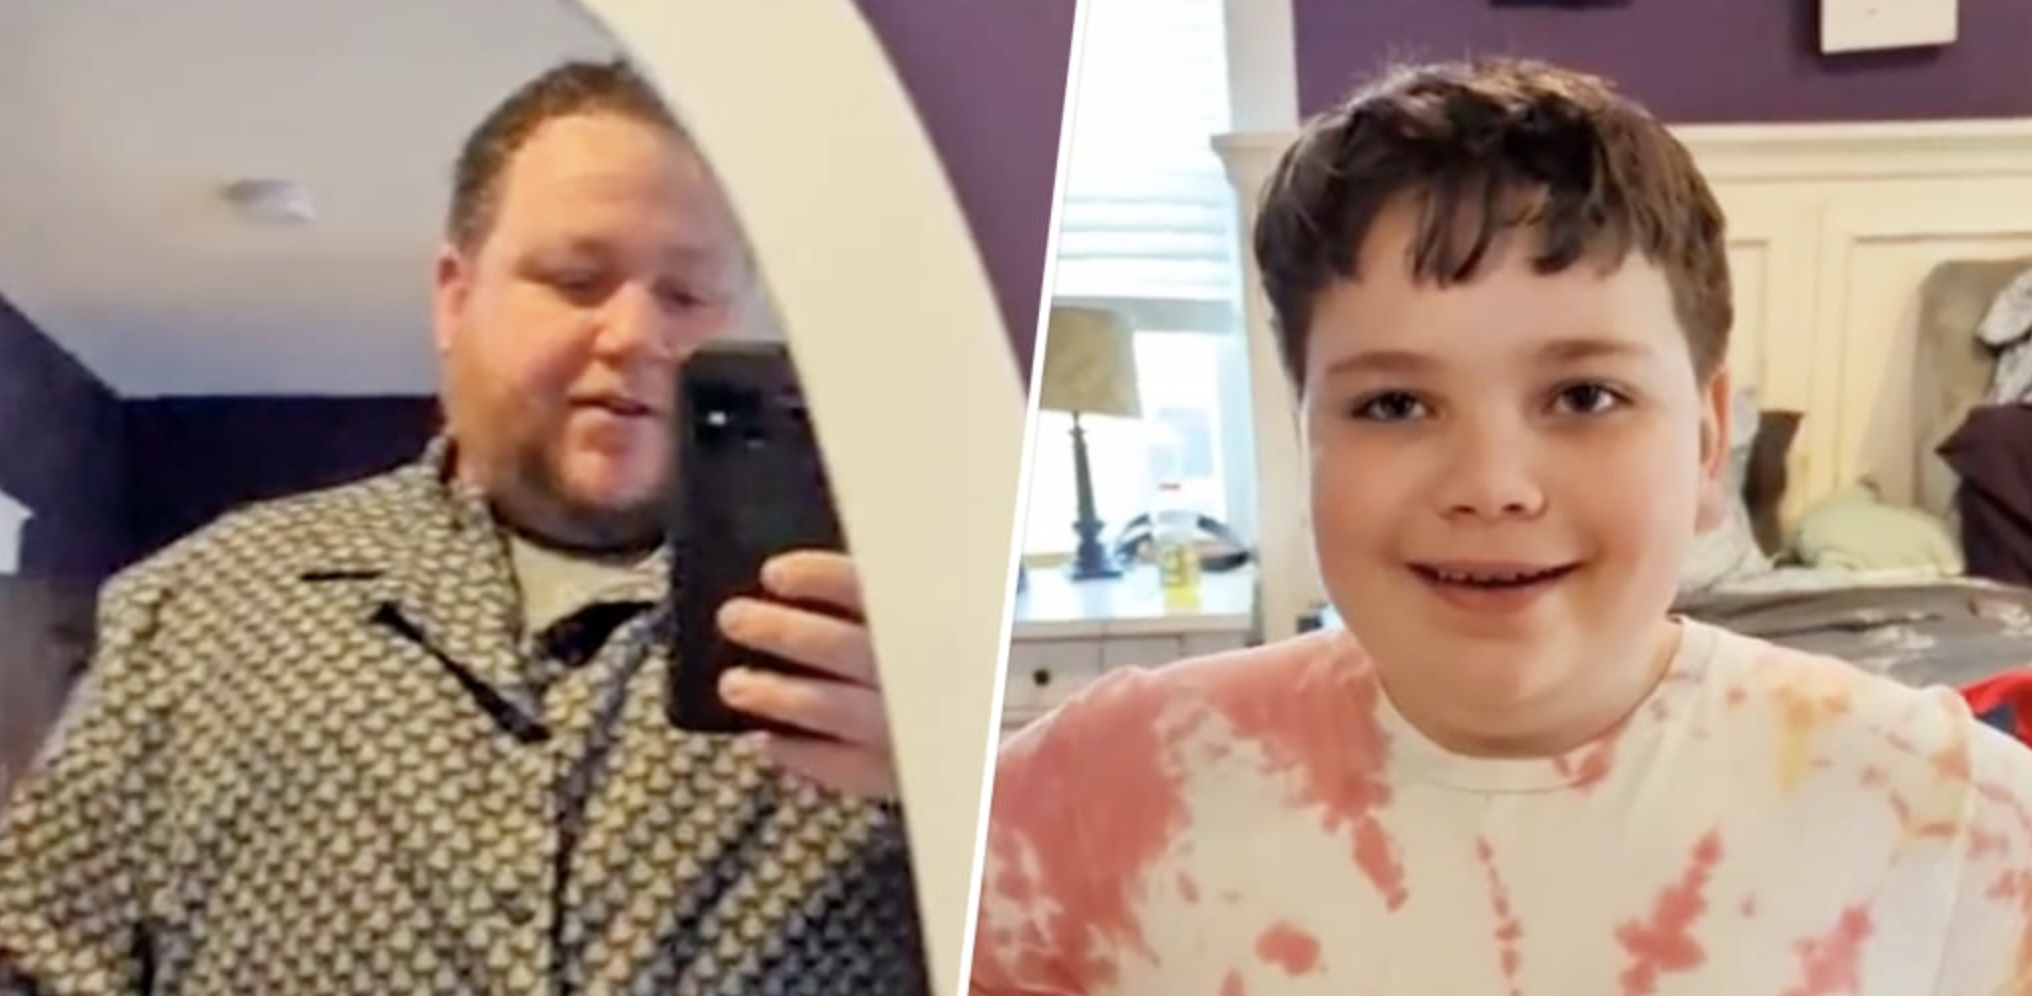 Boy Gives Dad a Shirt He Sewed Himself and the Precious Exchange Has Gone Viral